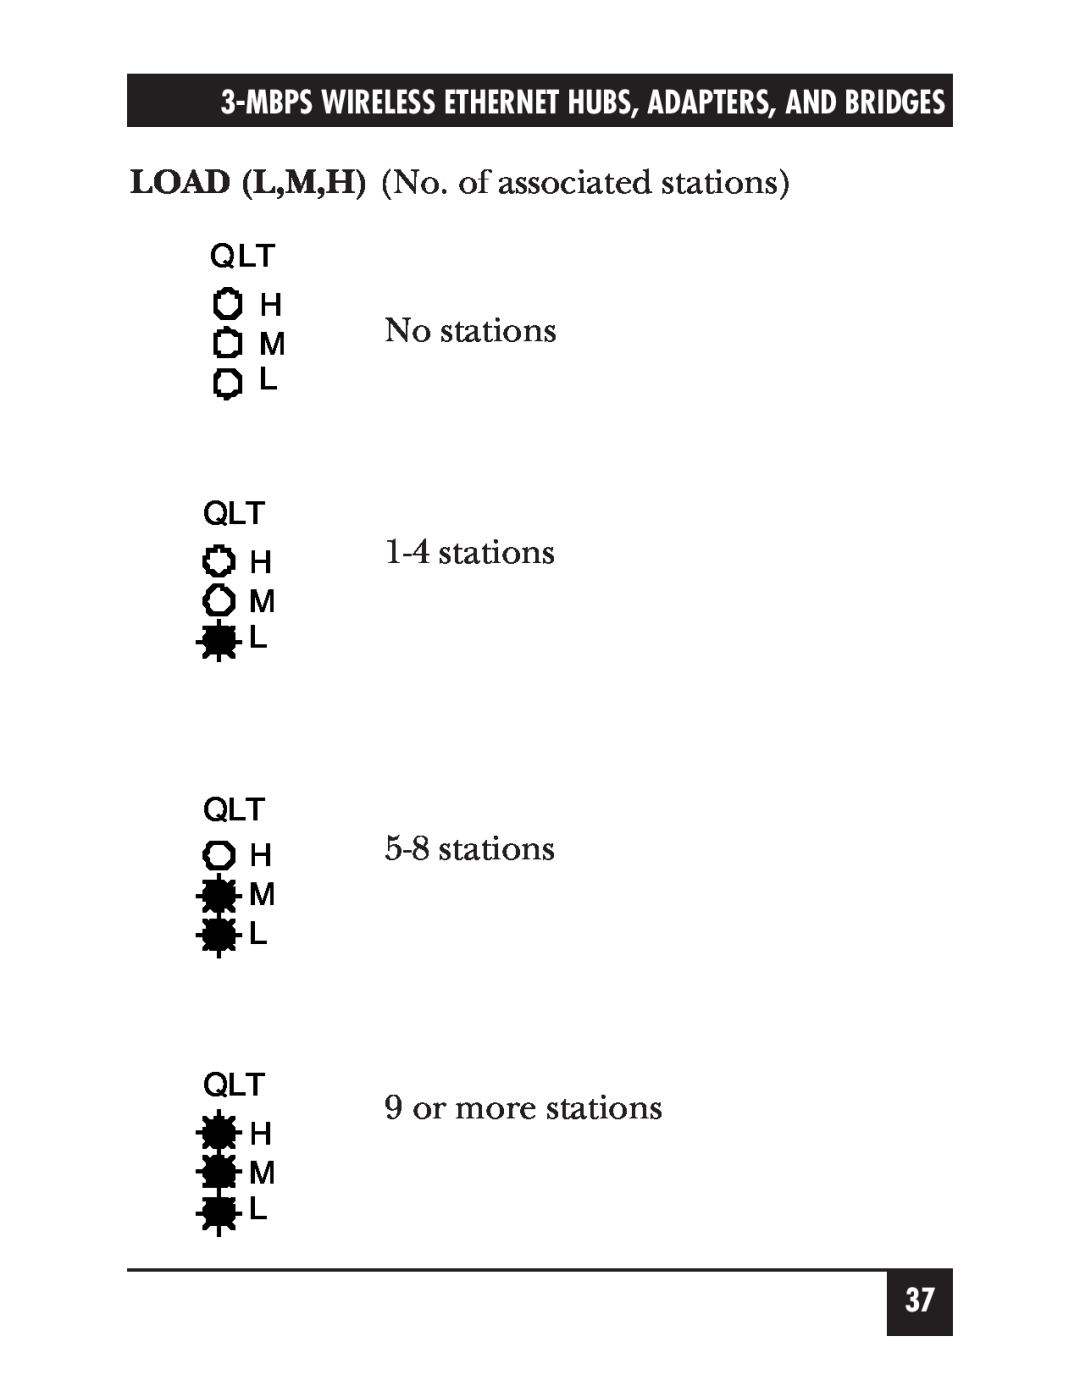 Black Box LW012AE, LW011AE, LW008A, LW005A, LW009A LOAD L,M,H No. of associated stations, M No stations, or more stations 